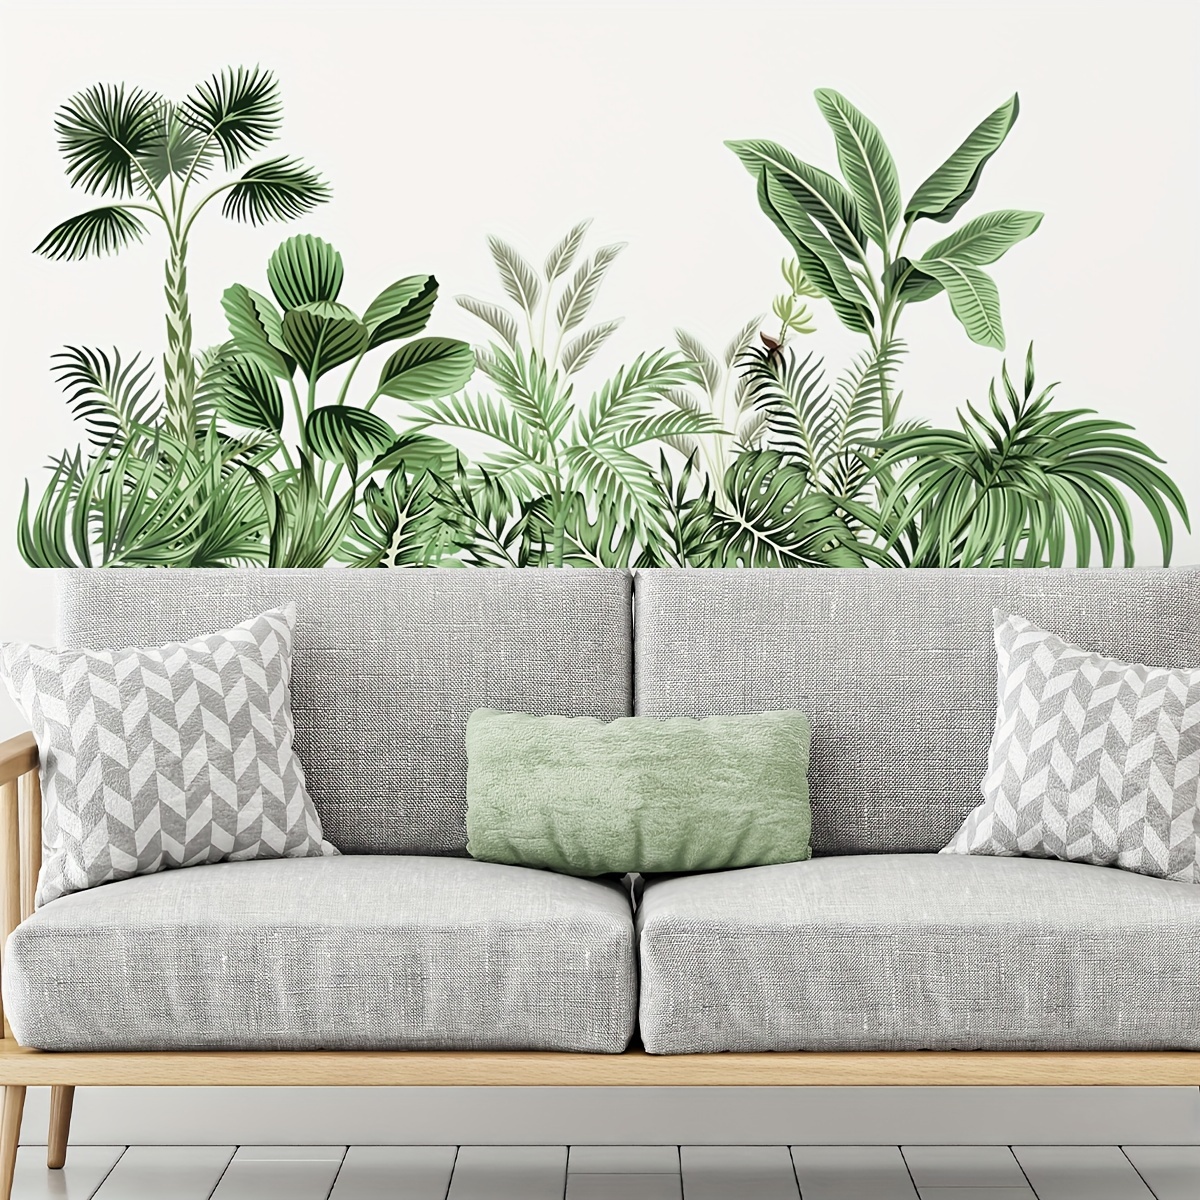 

1pc Creative Wall Sticker, Green Plant Flower Pattern Self-adhesive Wall Stickers, Bedroom Entryway Living Room Porch Home Decoration Wall Stickers, Removable Stickers, Wall Decor Decals